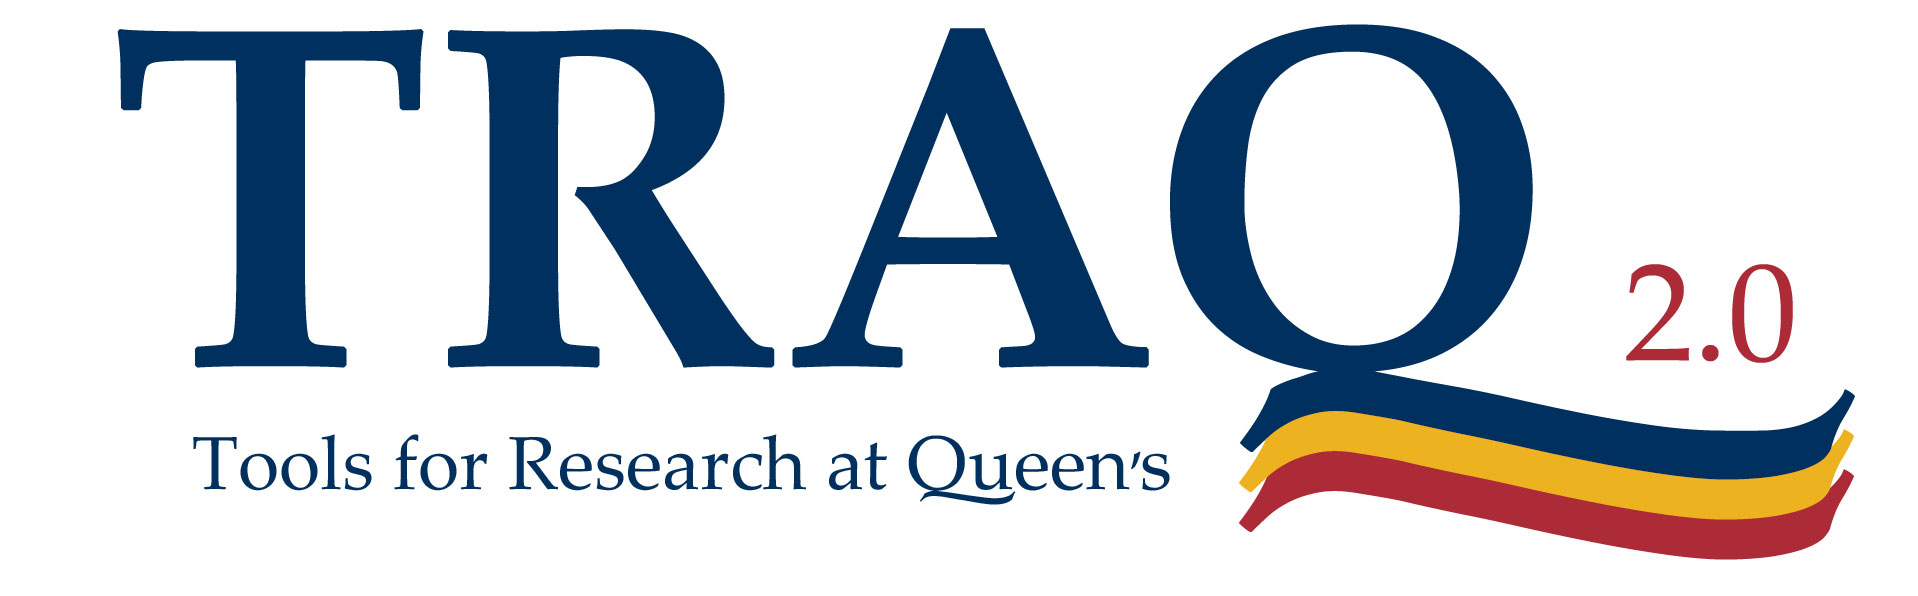 Tool for Researchers at Queen's logo